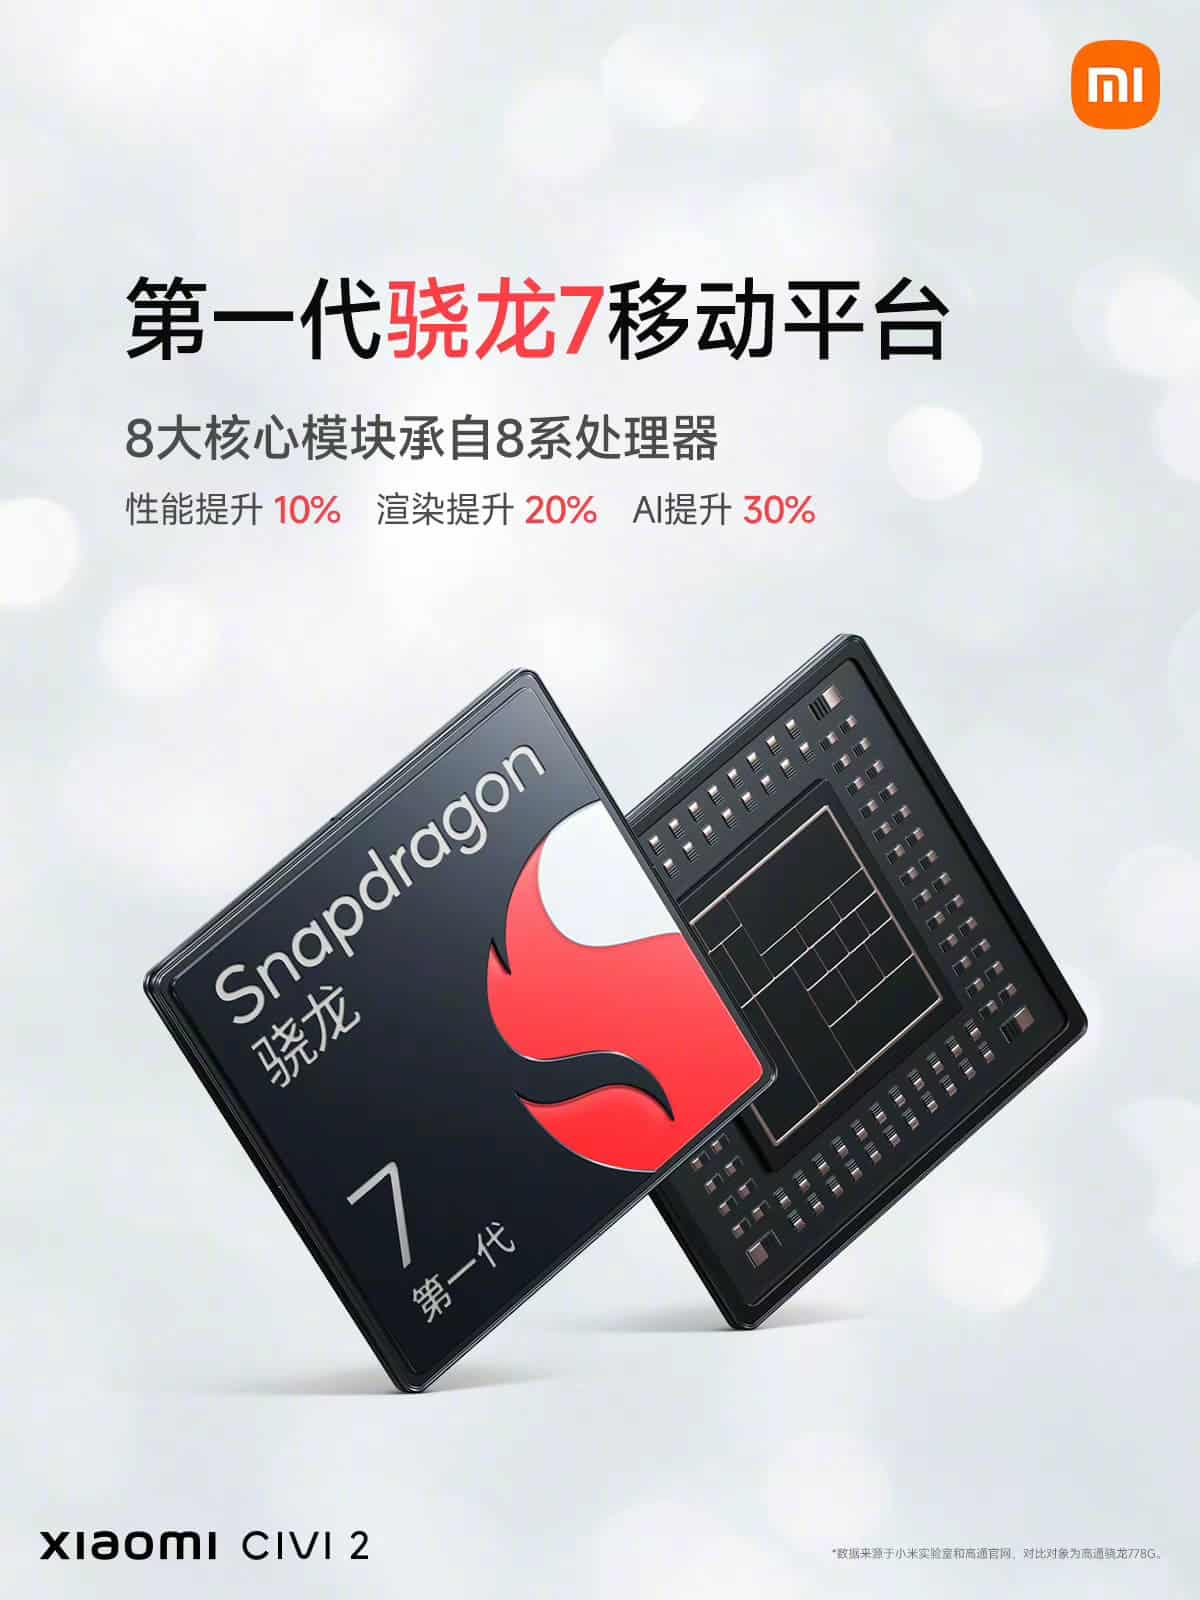 Snapdragon 7 first generation